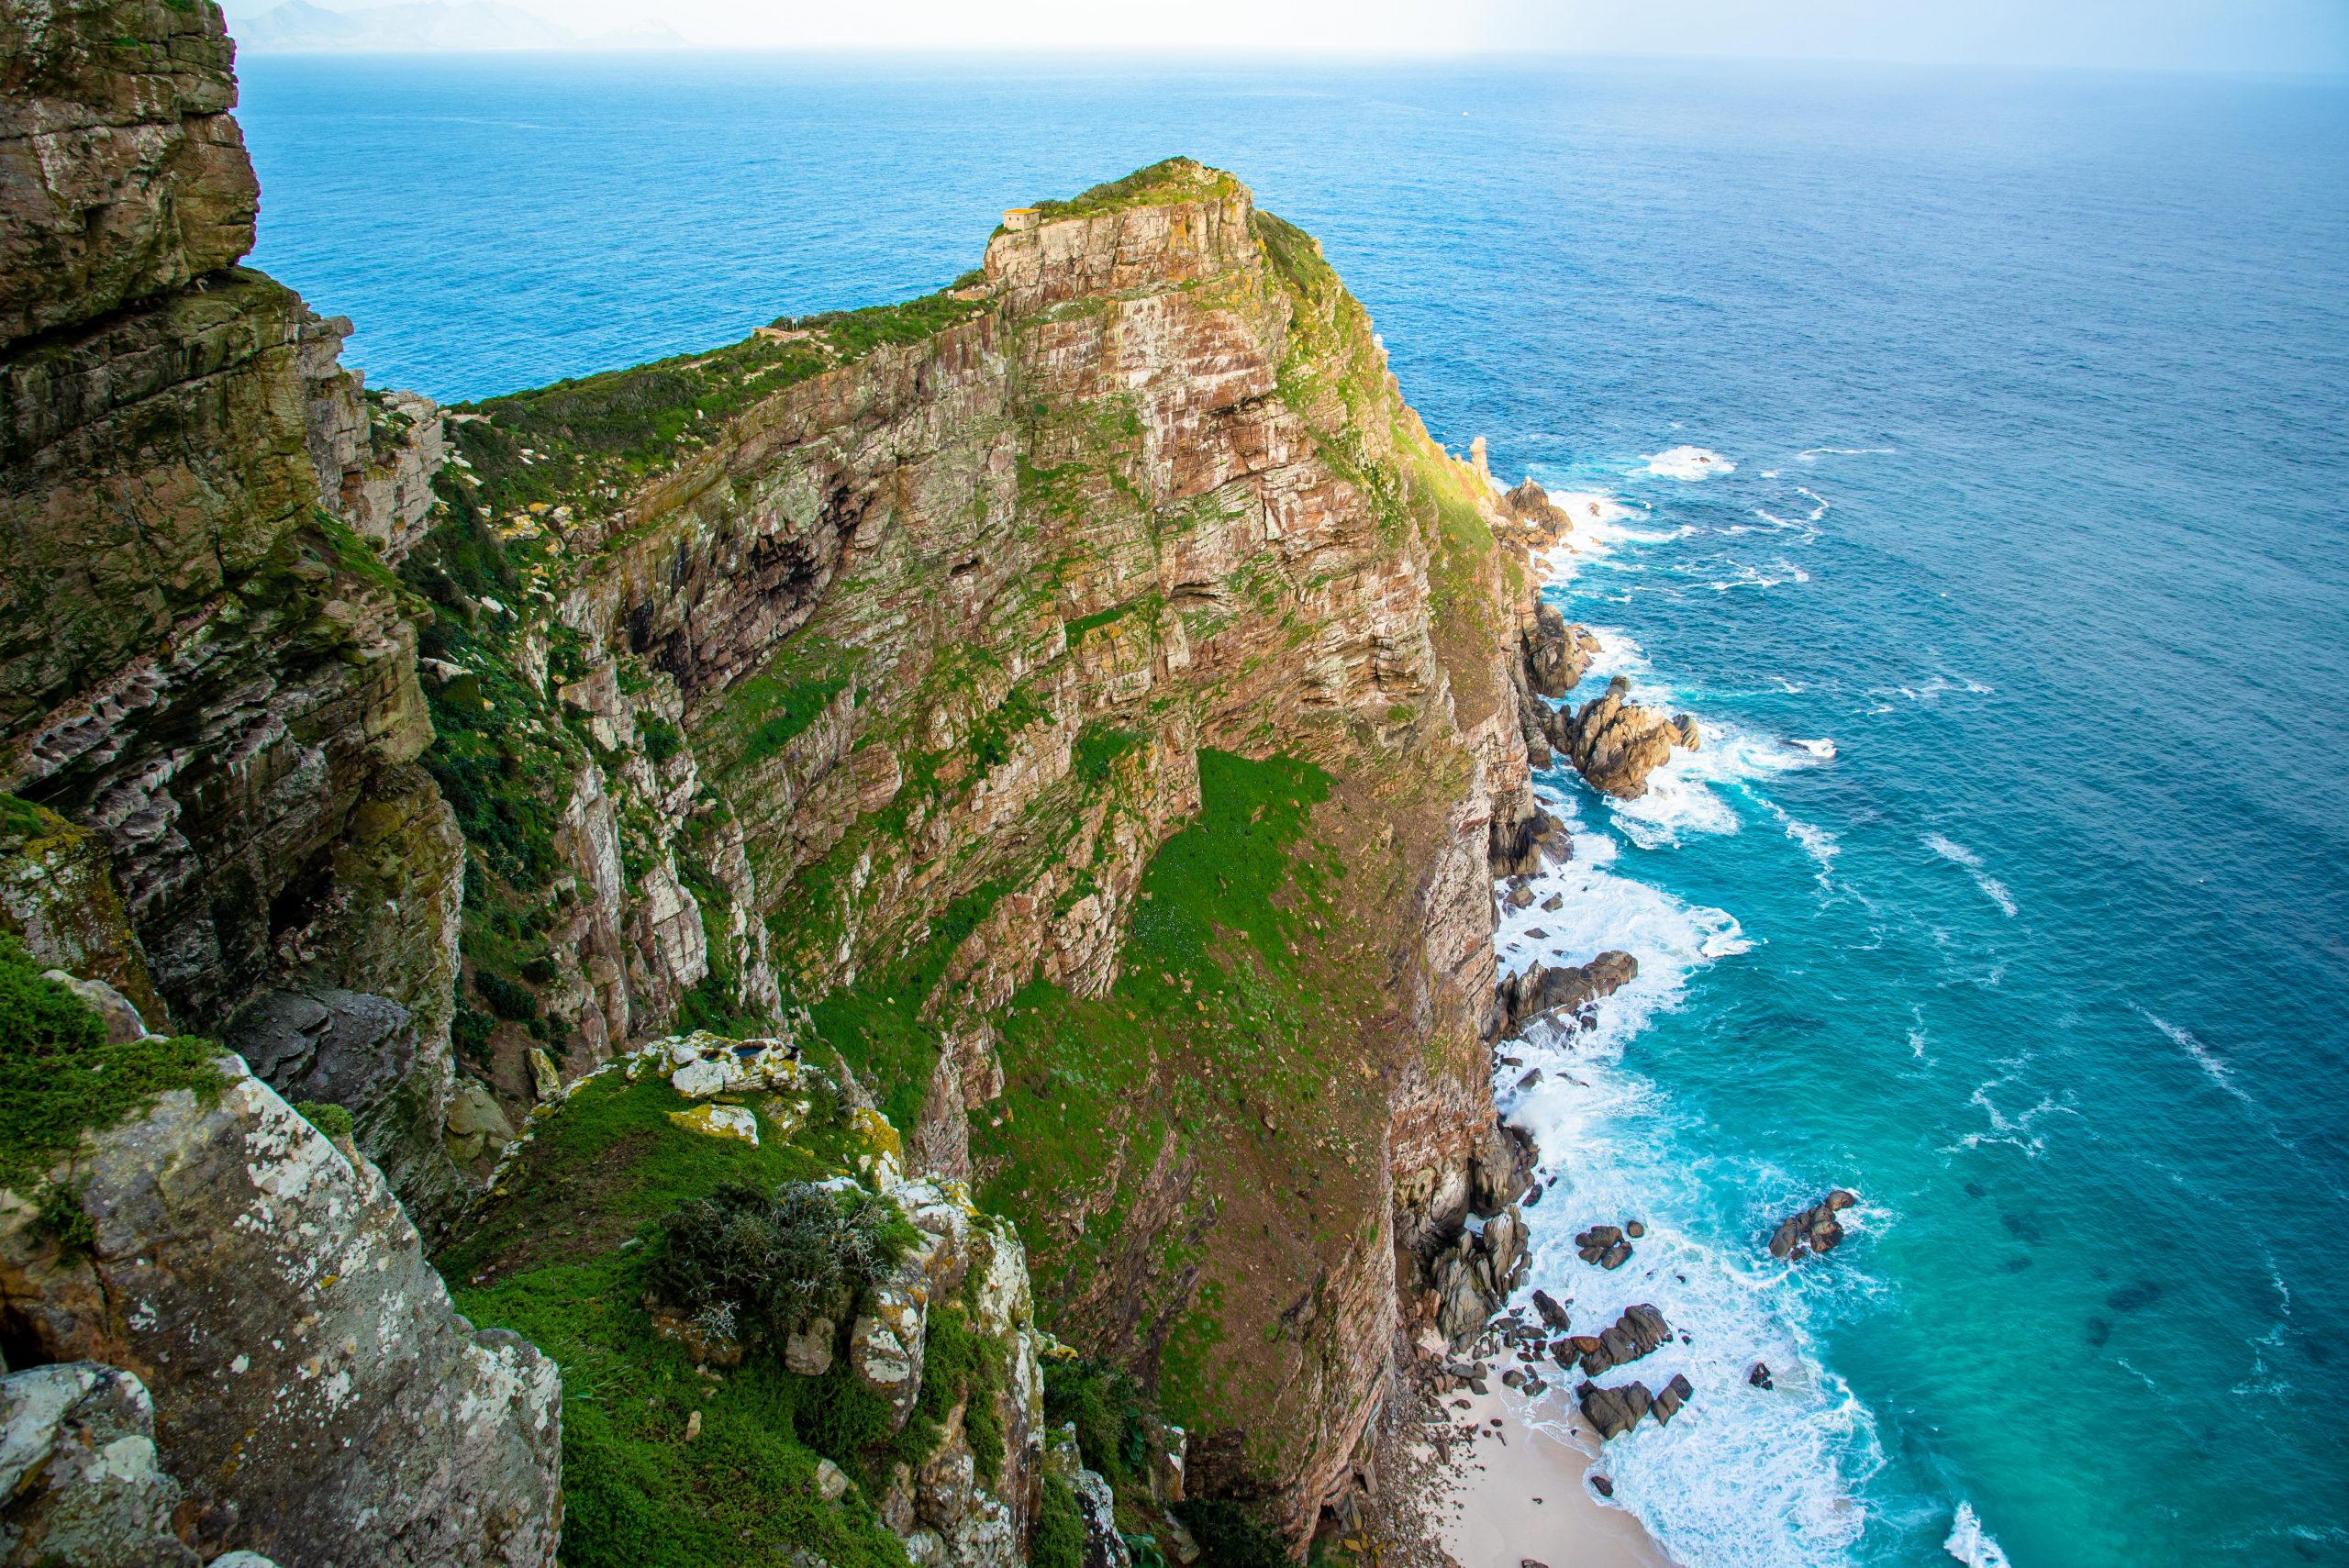 Cape Point, South Africa